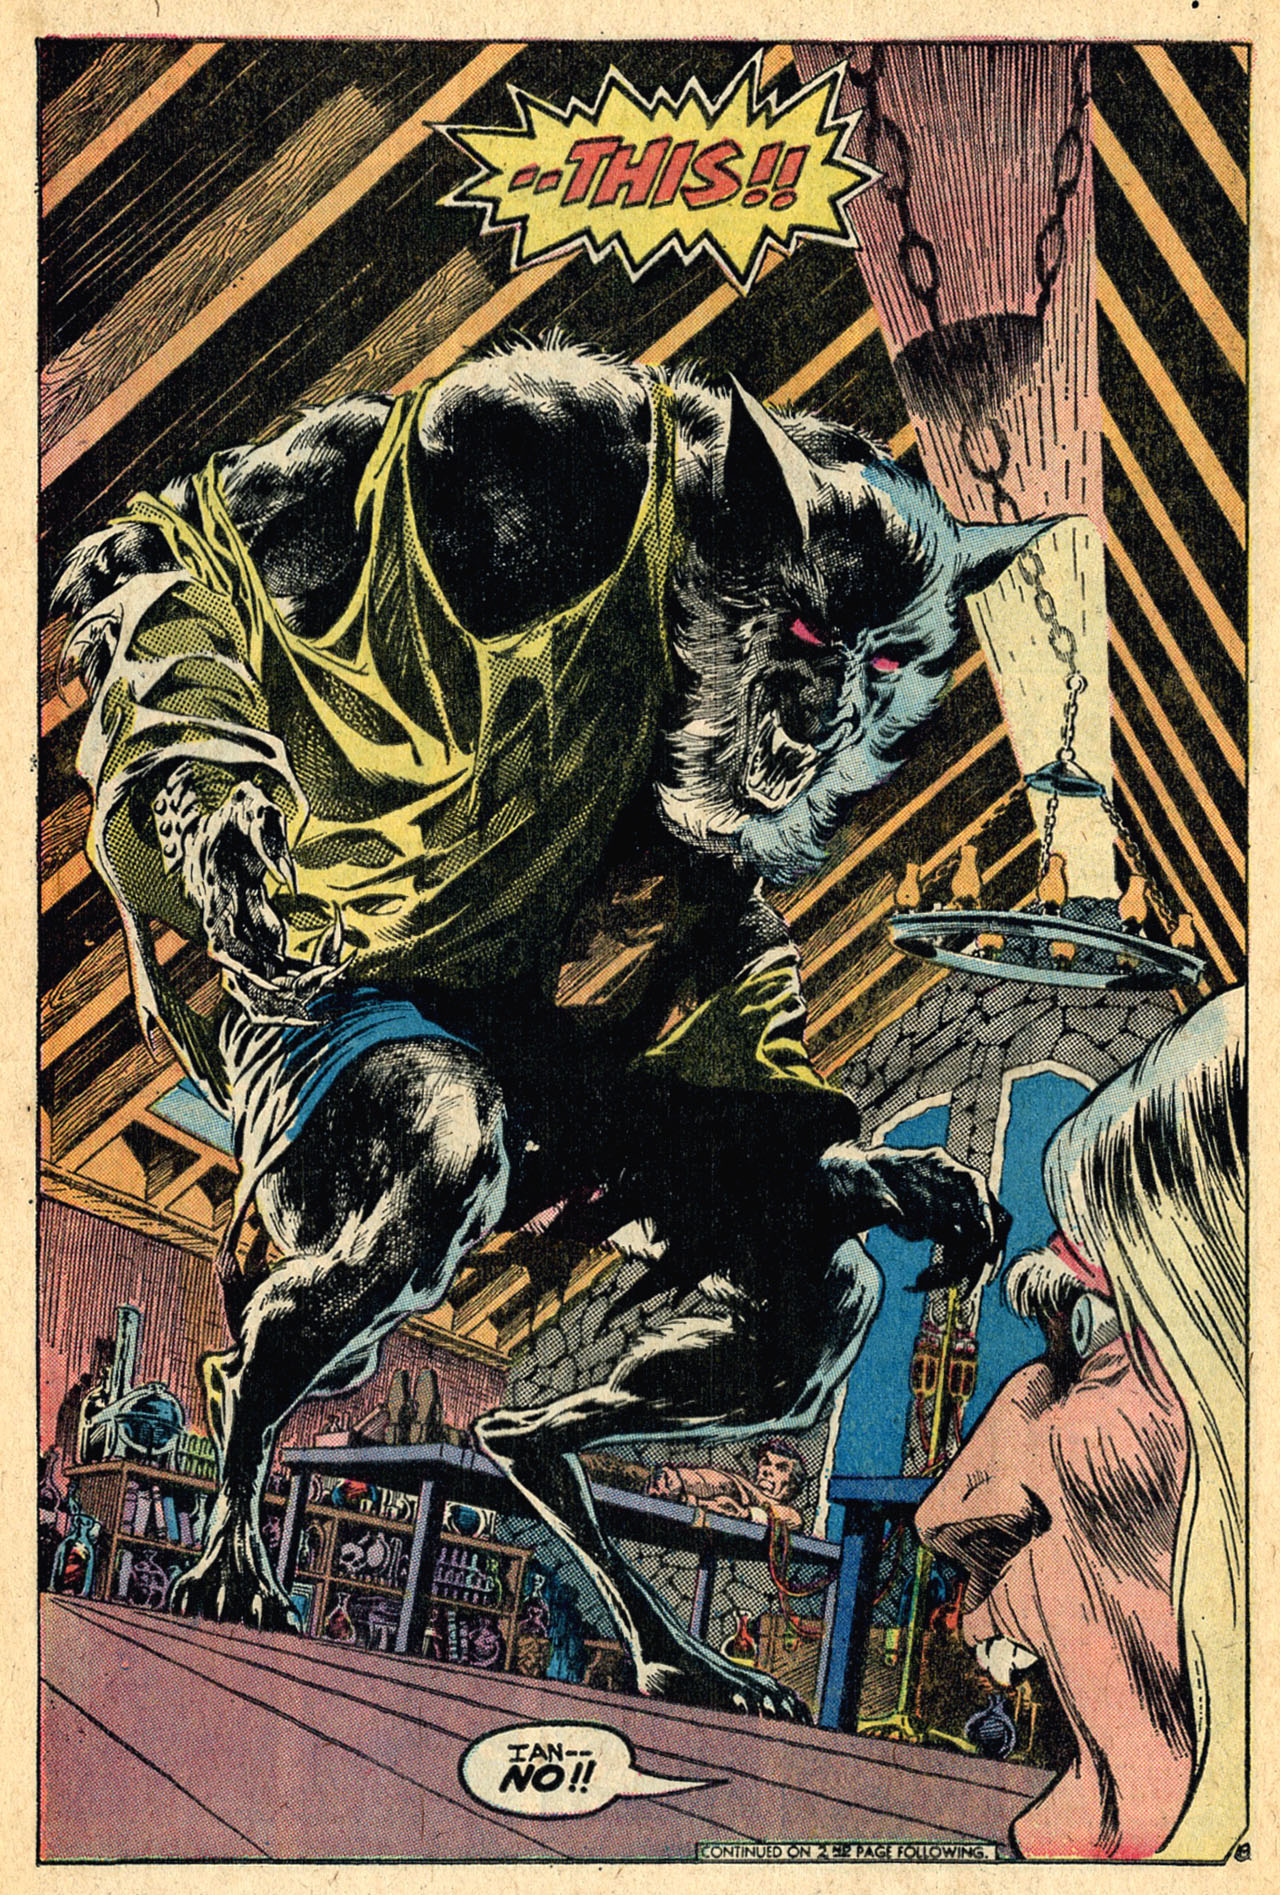 Swamp Thing #5 the legendary werewolf, by Len Wein and Bernie Wrightson